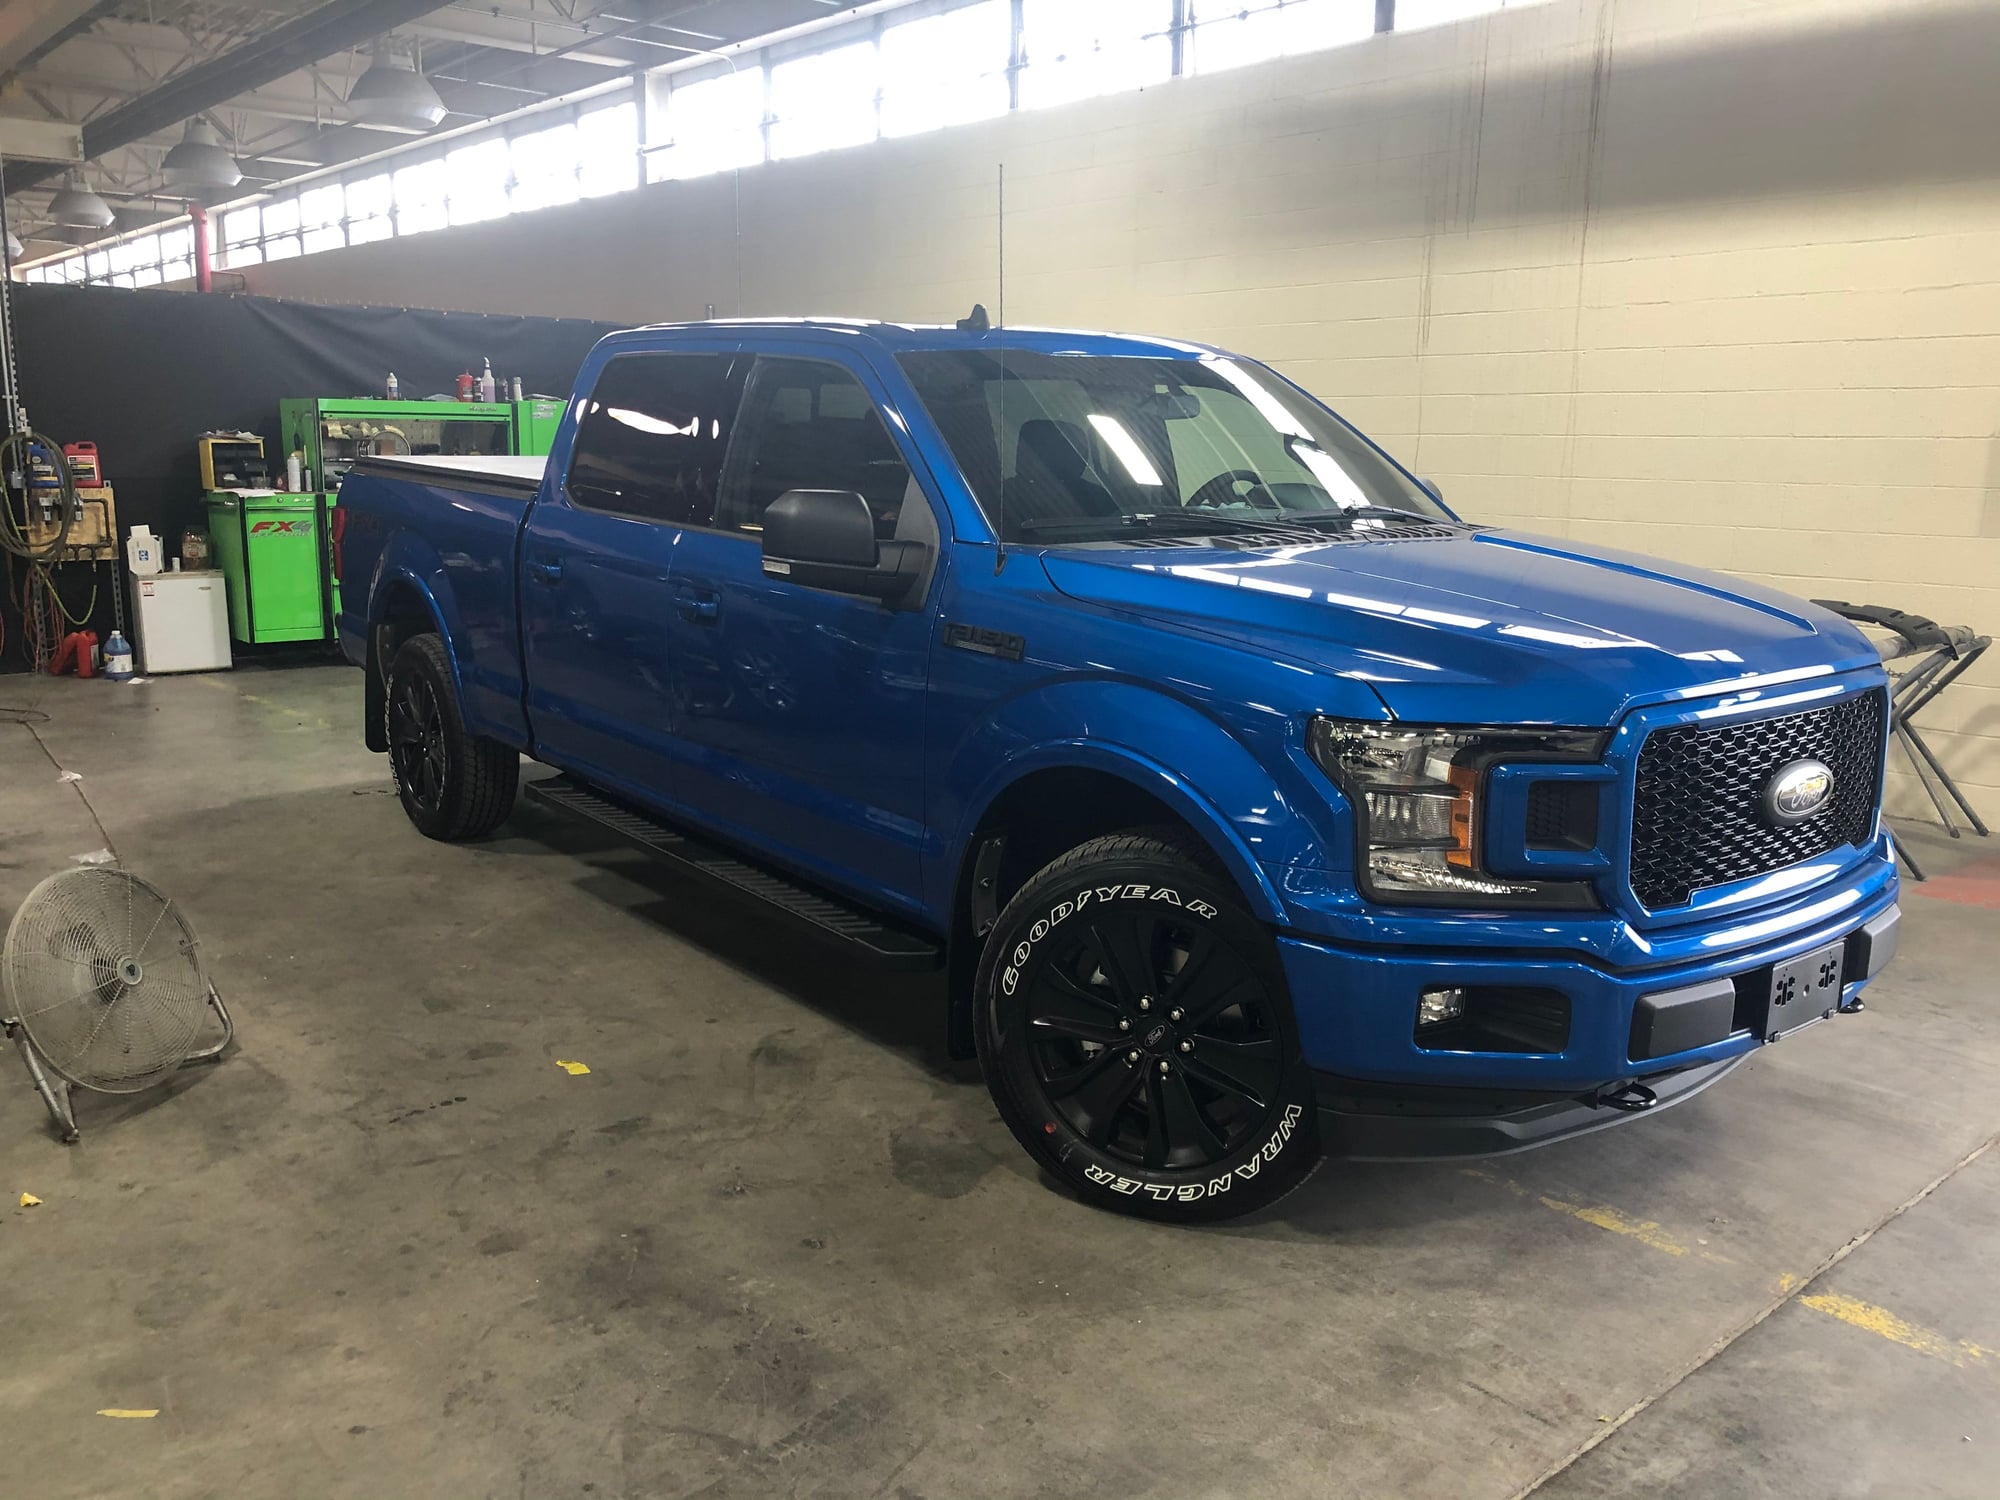 What color is the dark tan trim? - Ford F150 Forum - Community of Ford  Truck Fans